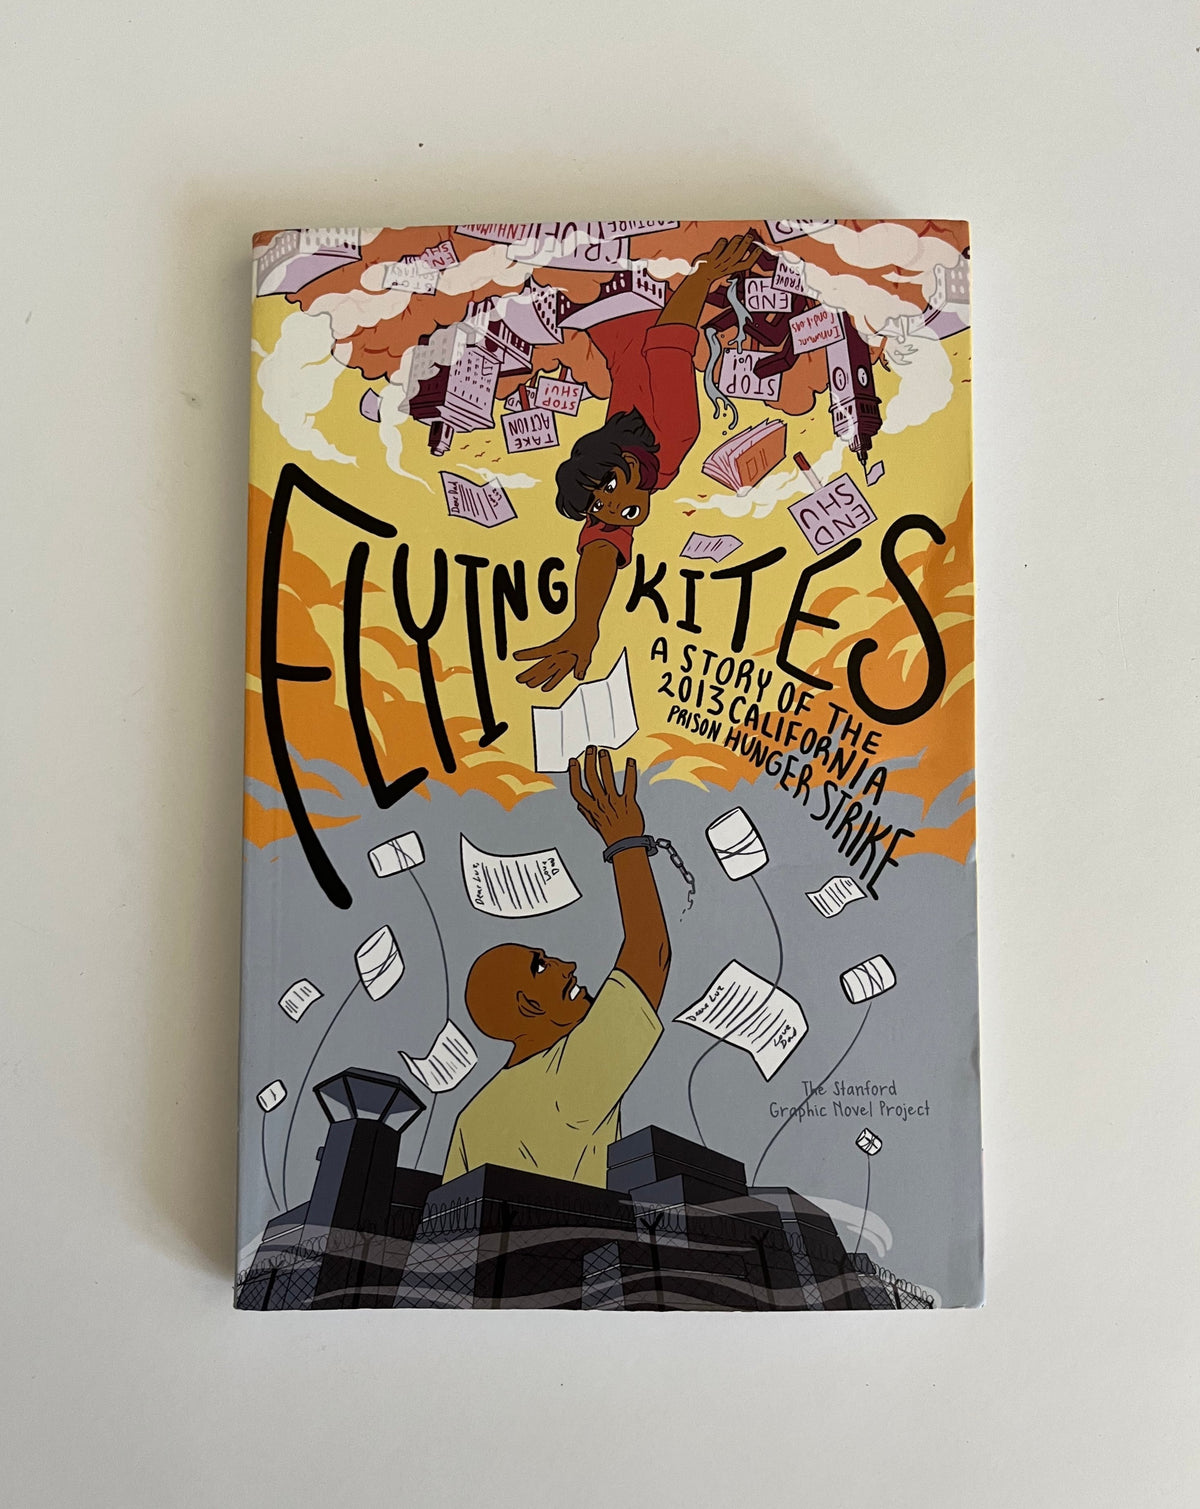 Flying Kites by The Stanford Graphic Novel Project